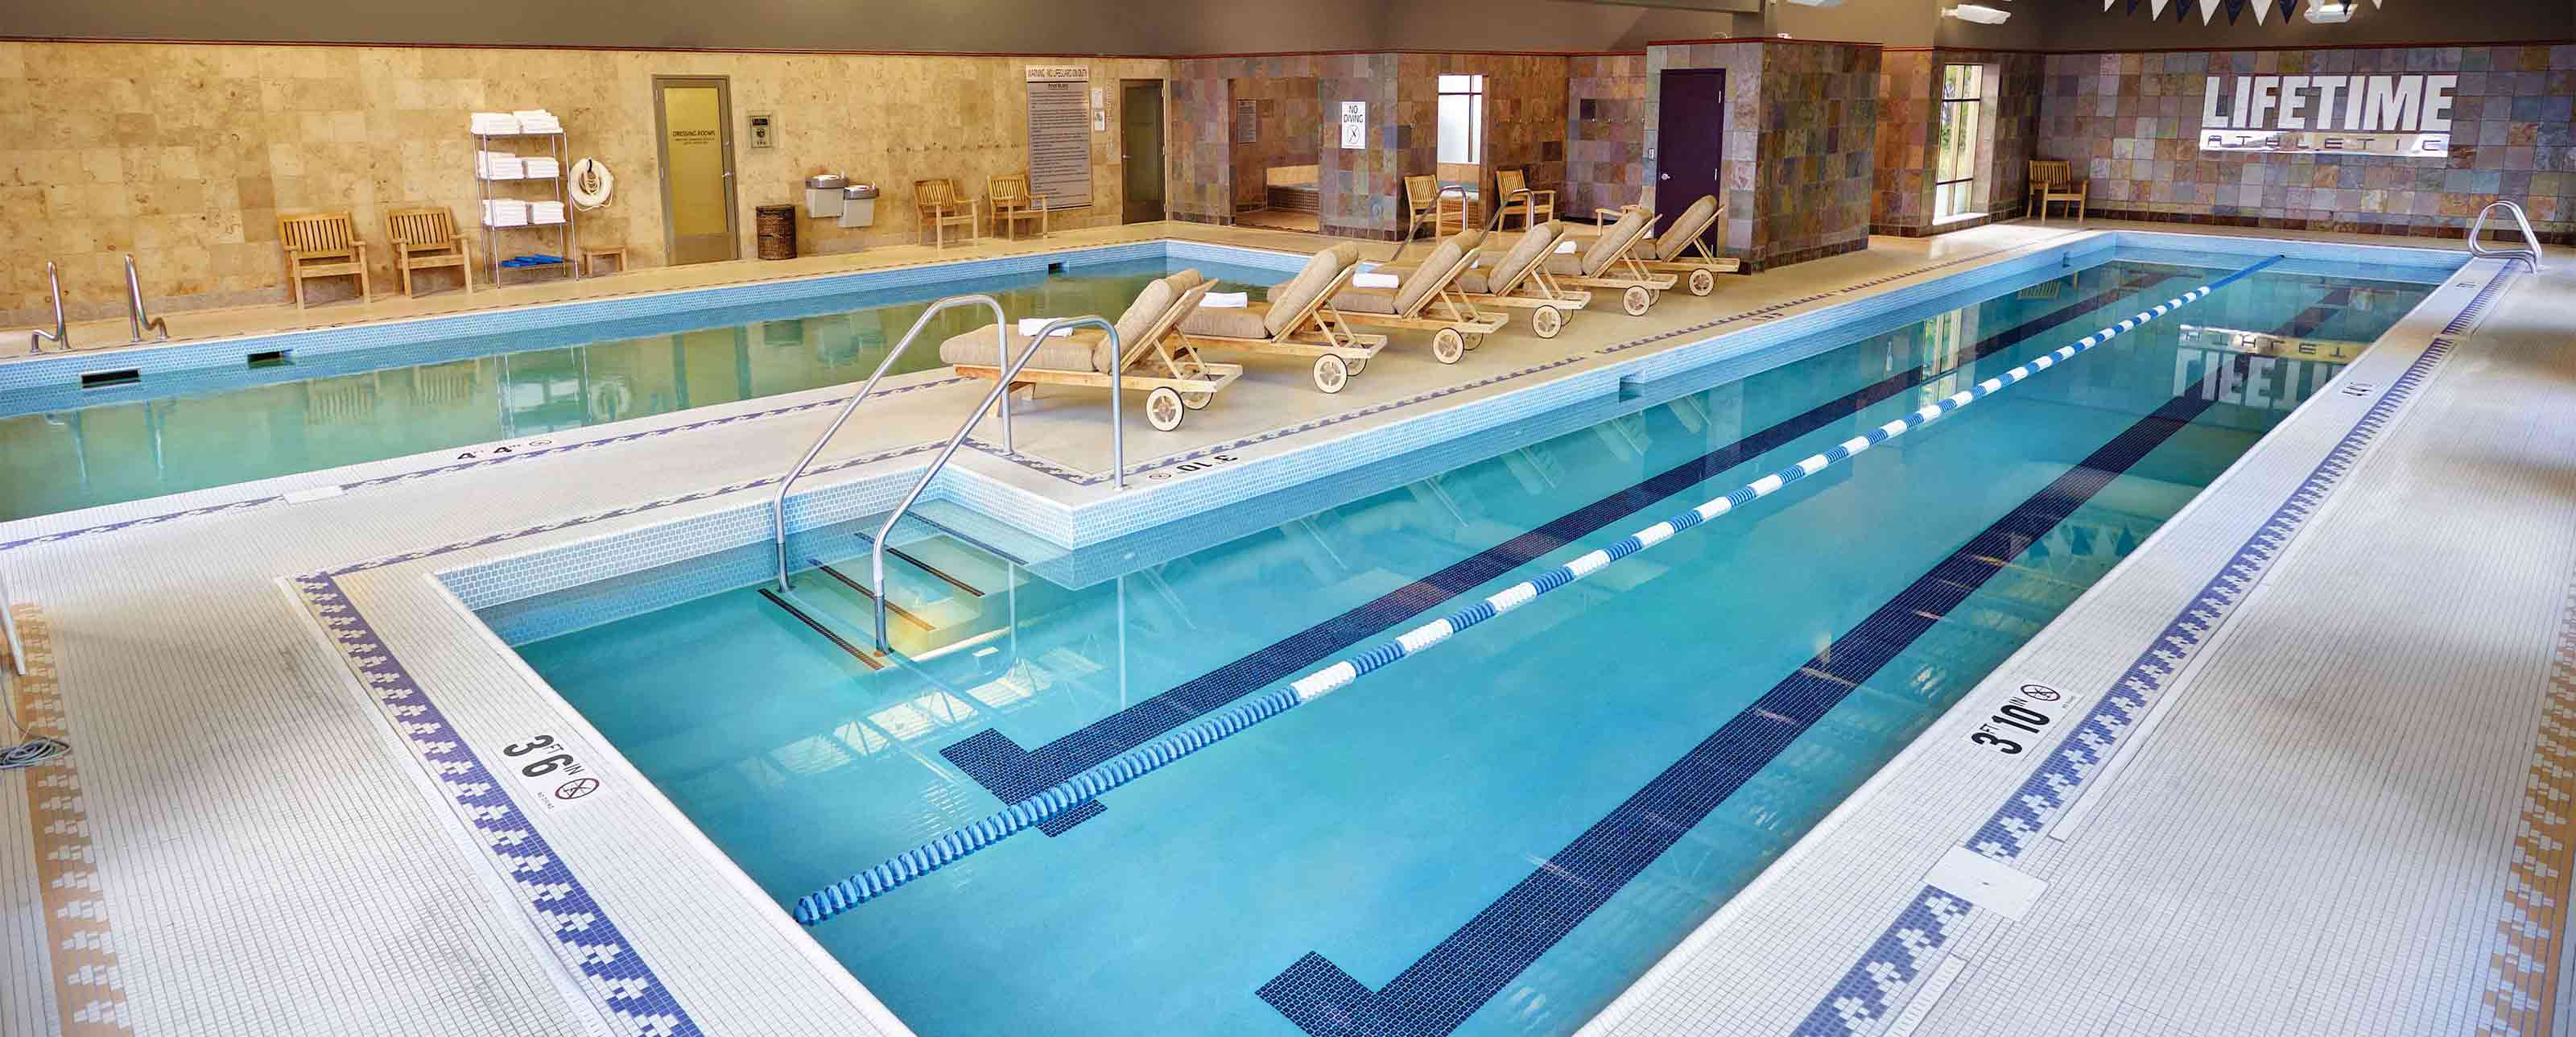 an indoor pool deck with 2 lane lap pool, lesiure pool, and lounge chairs